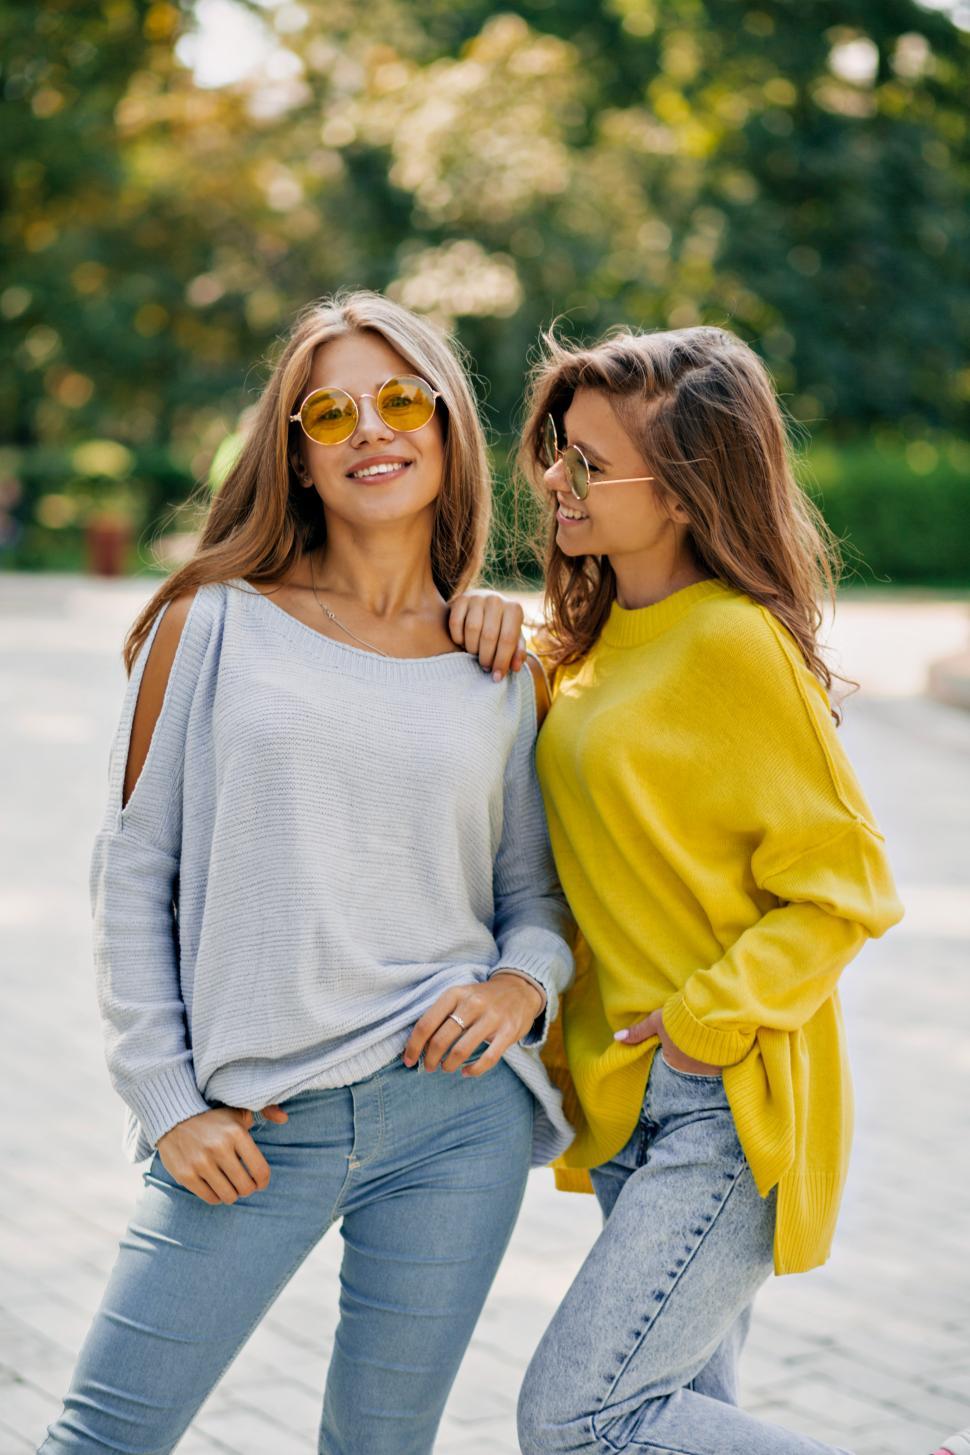 Download Free Stock Photo of Two happy funny hipster girls in bright glasses and pullovers 